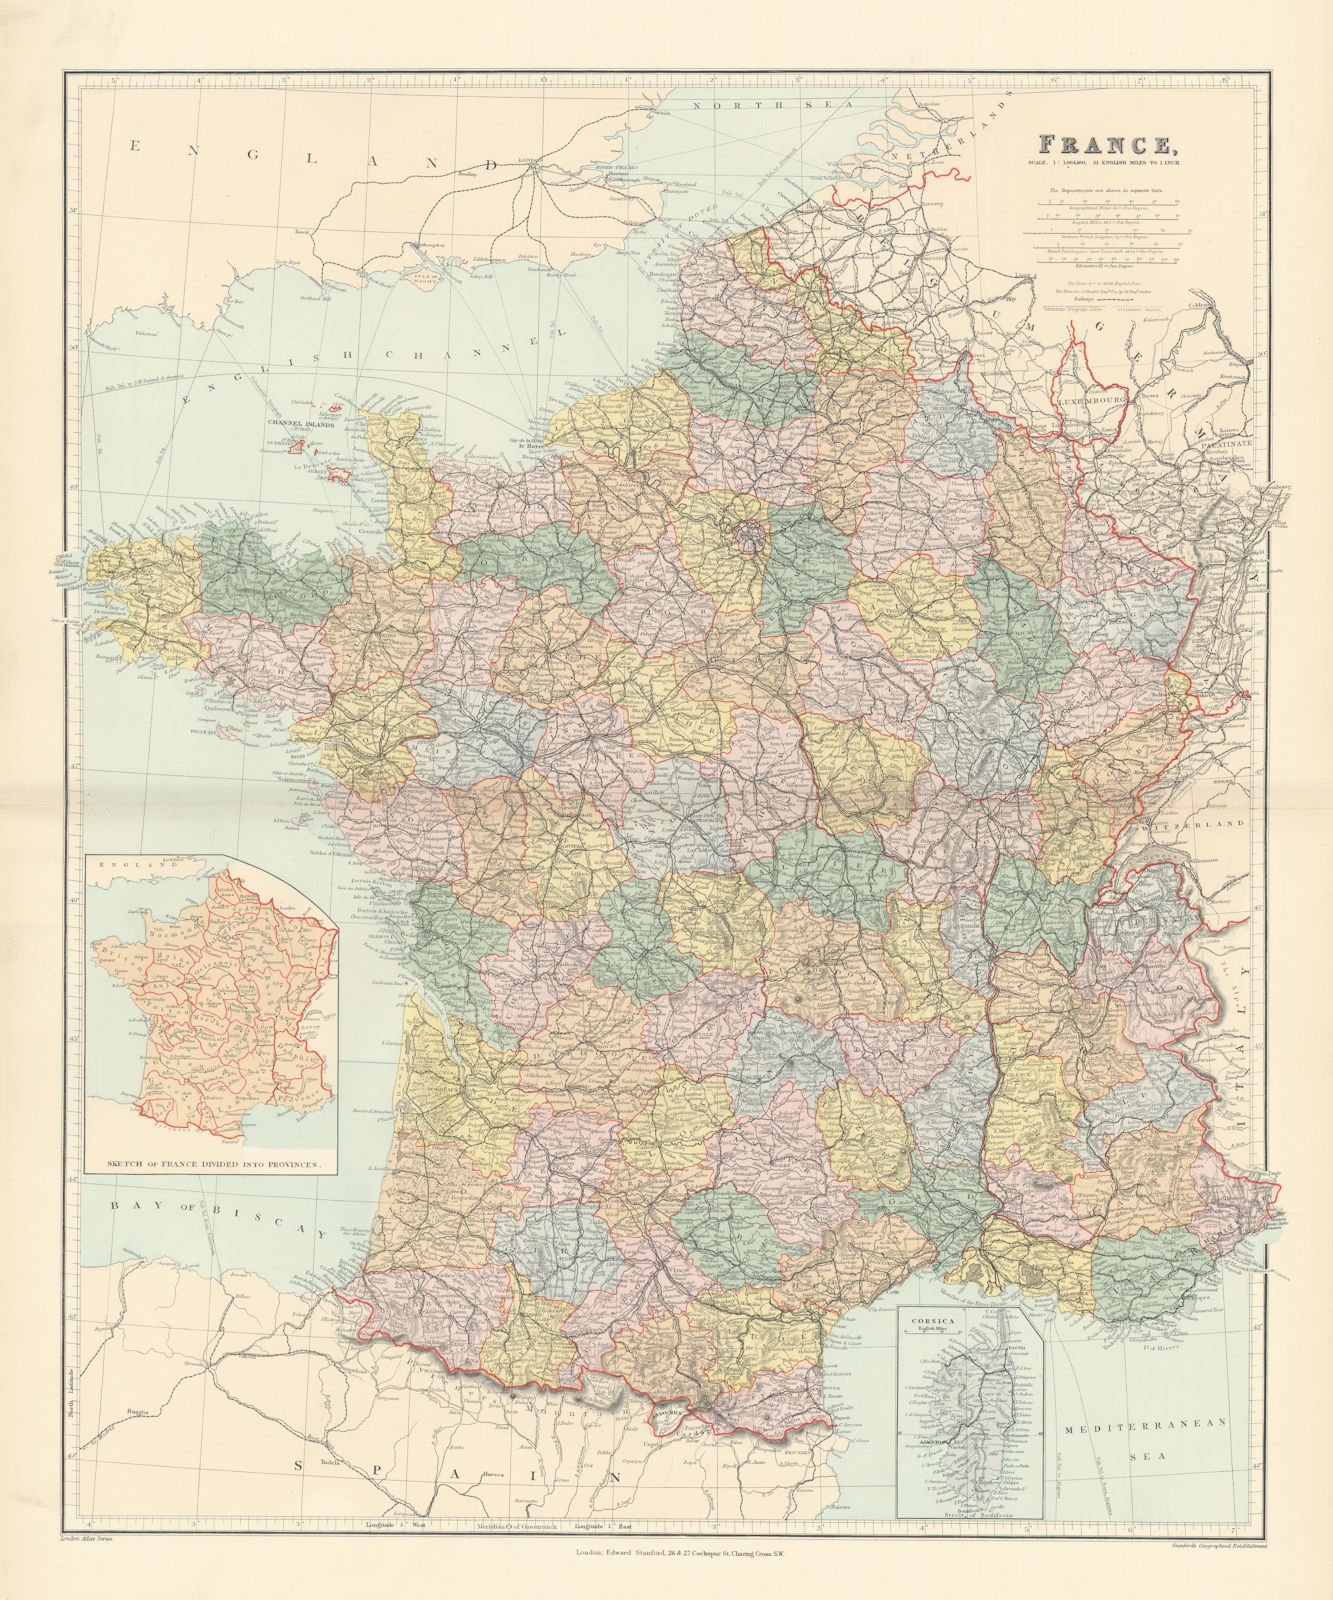 Associate Product France in departements without Alsace Lorraine. Large 65x54cm. STANFORD 1896 map